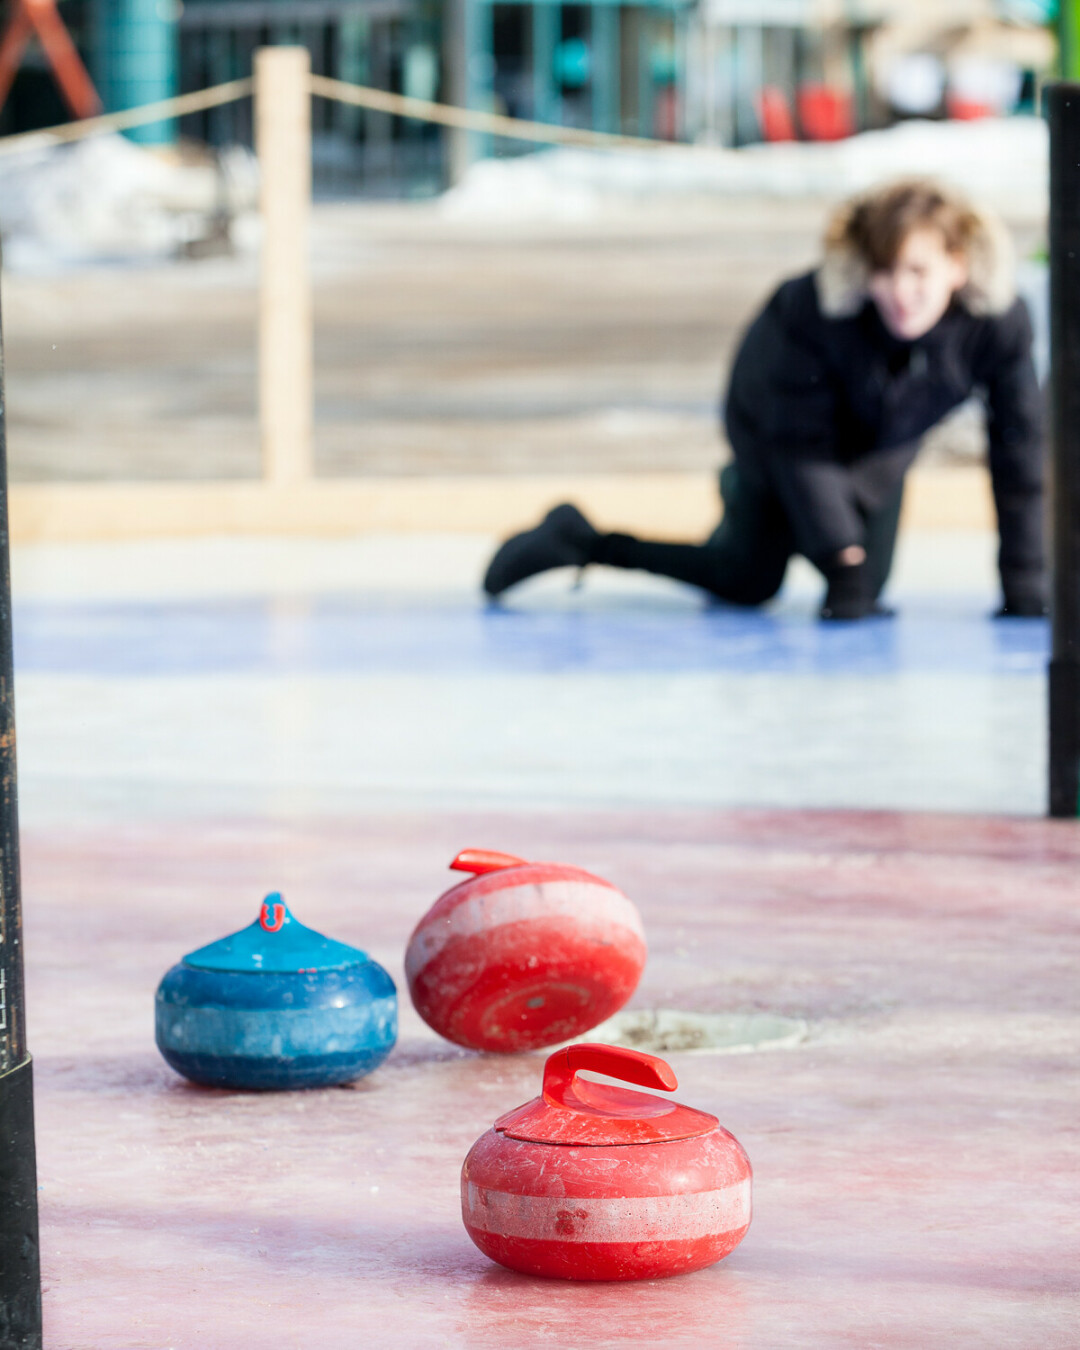 A crokicurl game in Winnipeg, Manitoba, where the sport was invented in 2017. (Submitted photo)